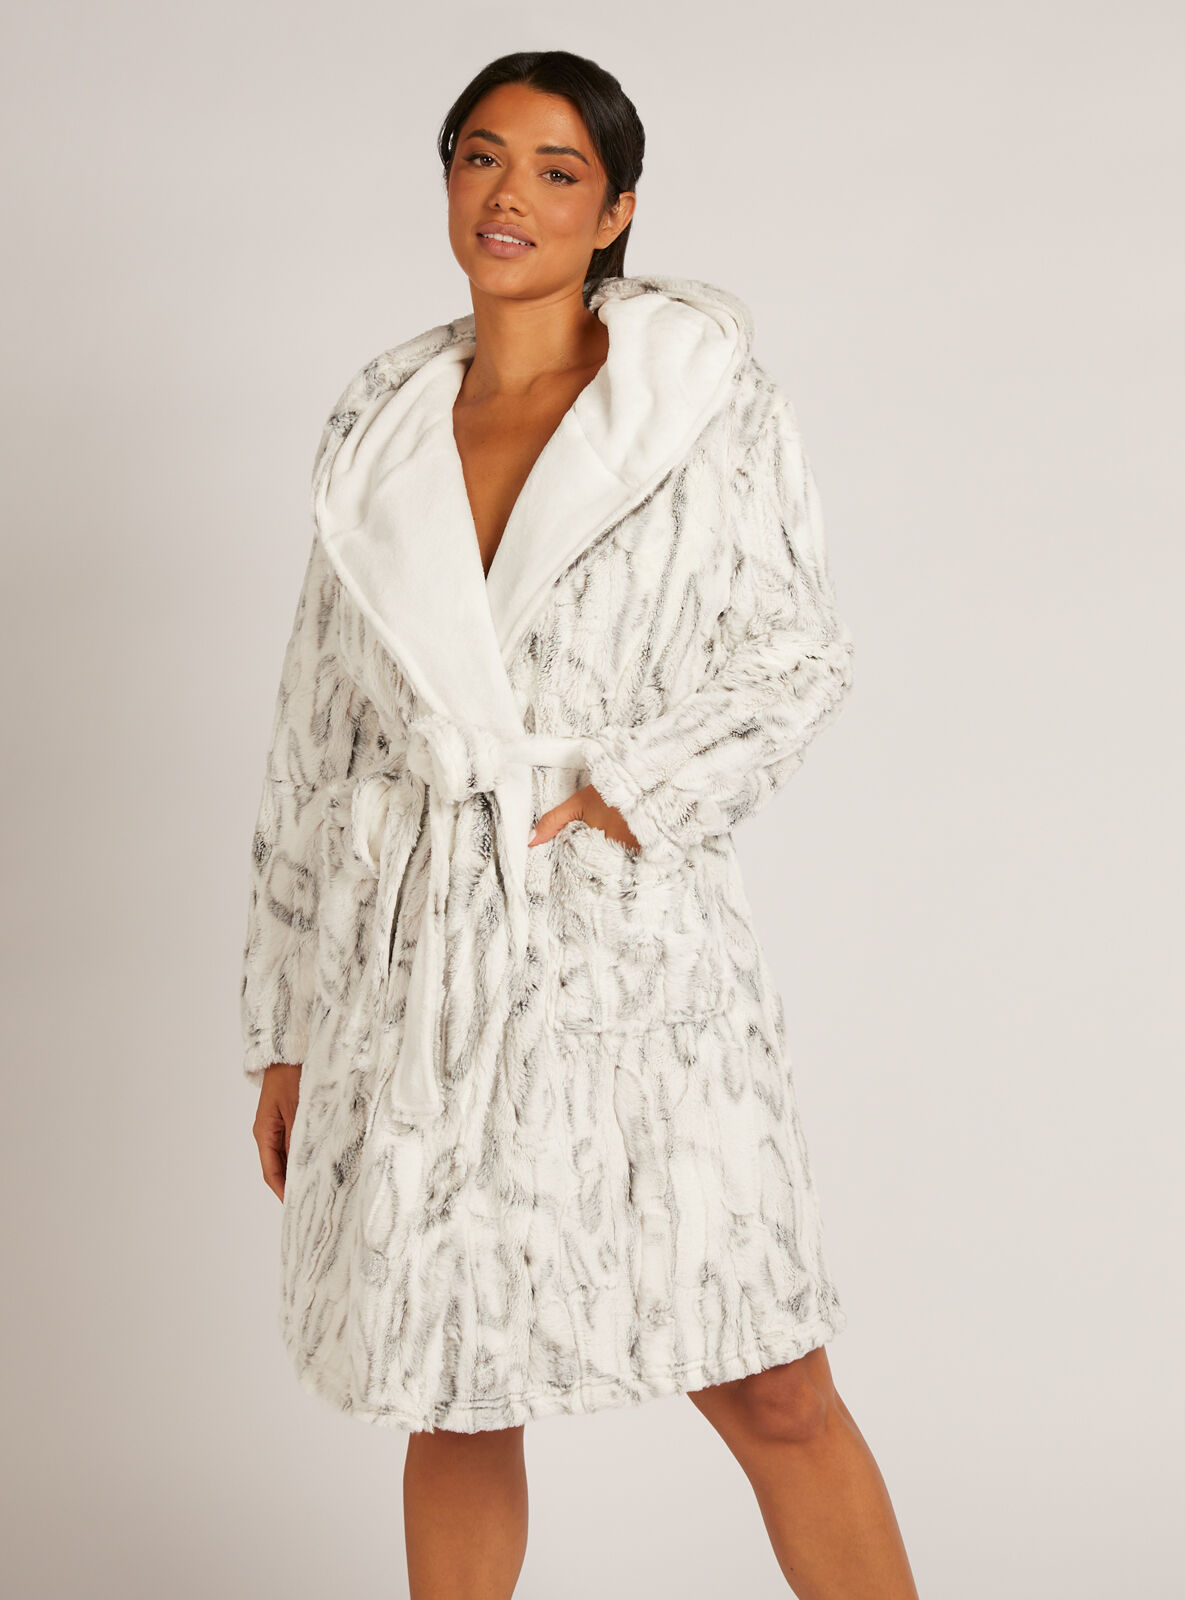 Luxury Spa Bathrobes | Soft Plush Robes for Men and Women